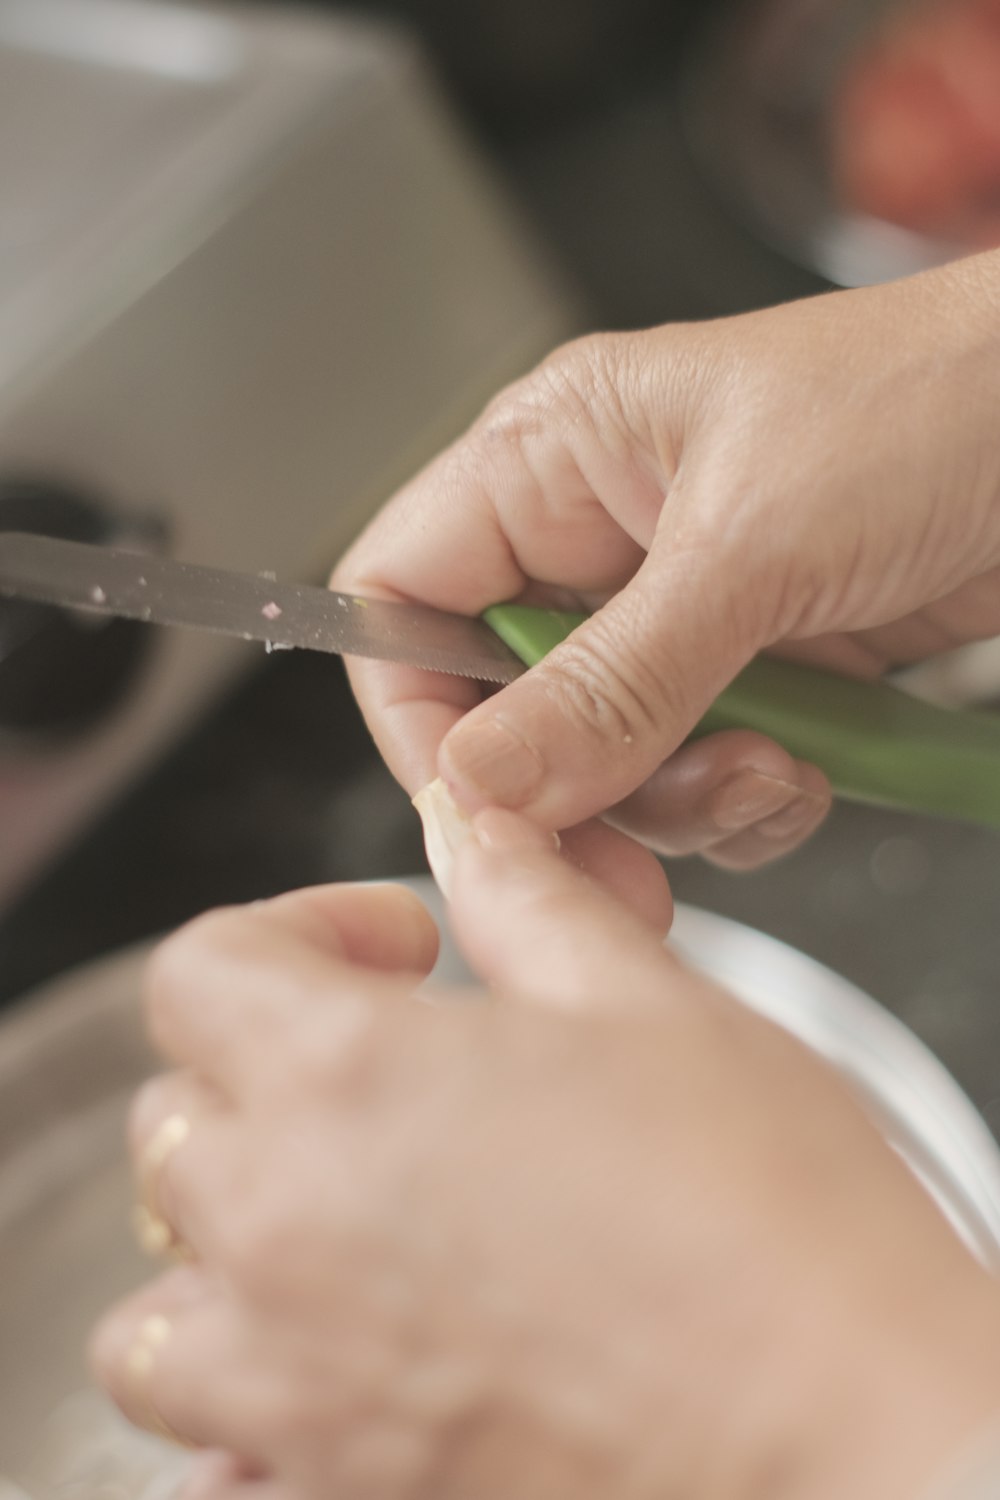 a close up of a person cutting something with a pair of scissors